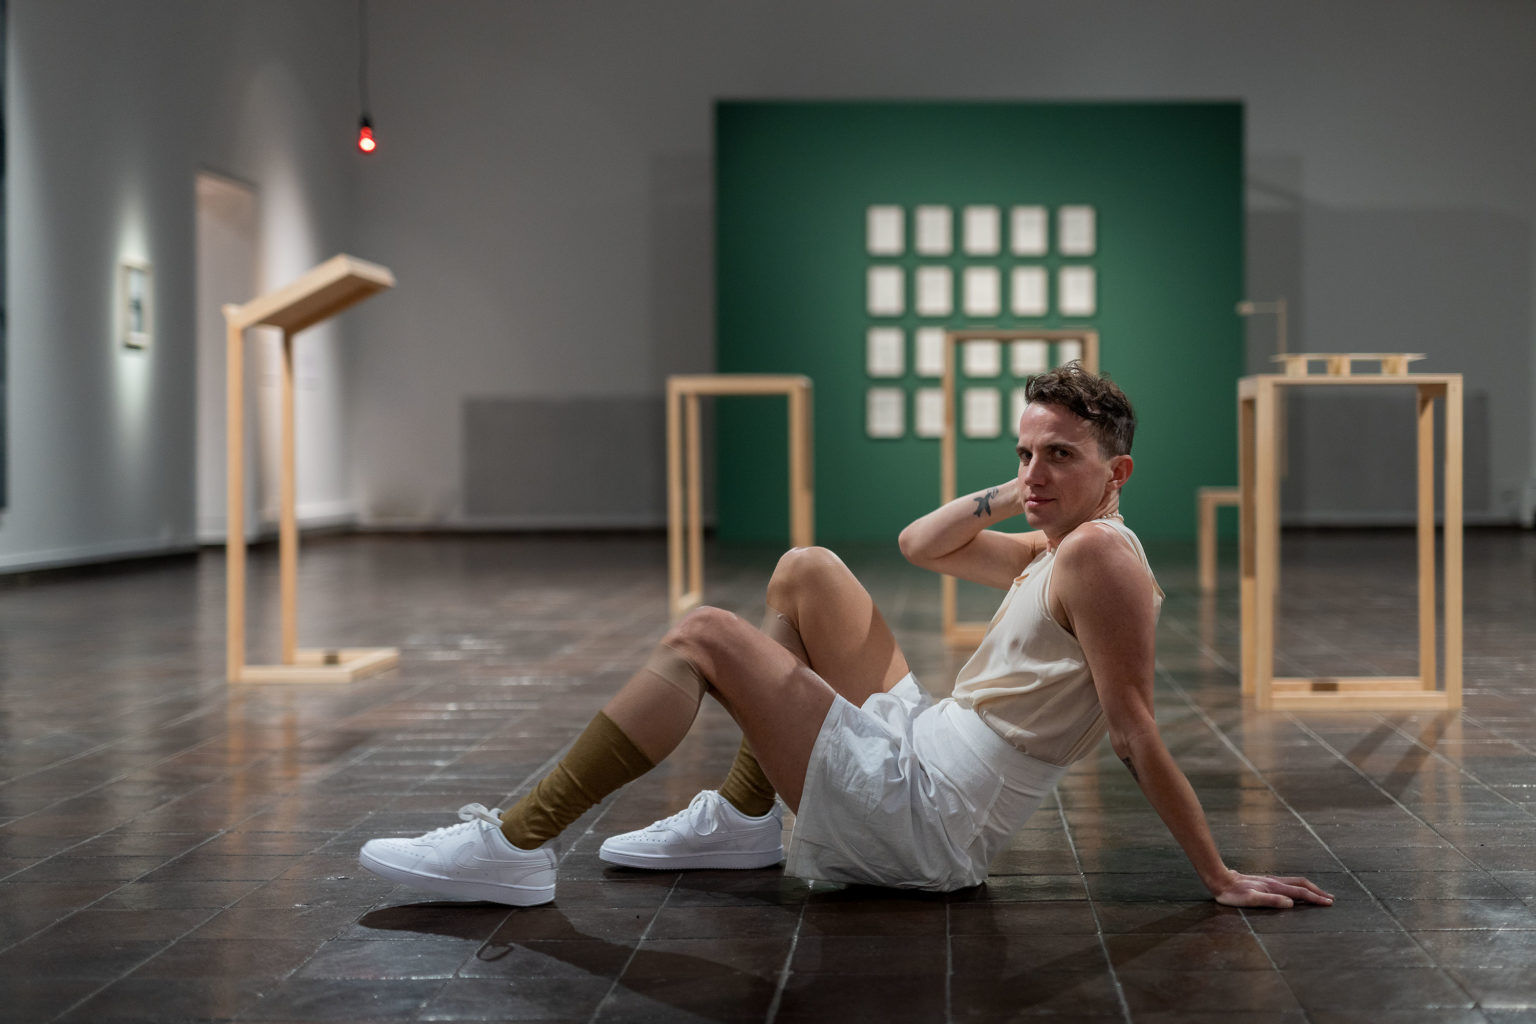 The image shows a young white man with curly light brown hair sitting on the floor of an art gallery in a reclining pose, looking into the camera. He has a tattoo on his inner right forearm and is wearing a light tan tank top, loosely fitting white shorts, high tan socks and white tennis shoes. Behind him we see minimal wooden plinths that display documents and an out of focus green wall with a grid of white papers on it.